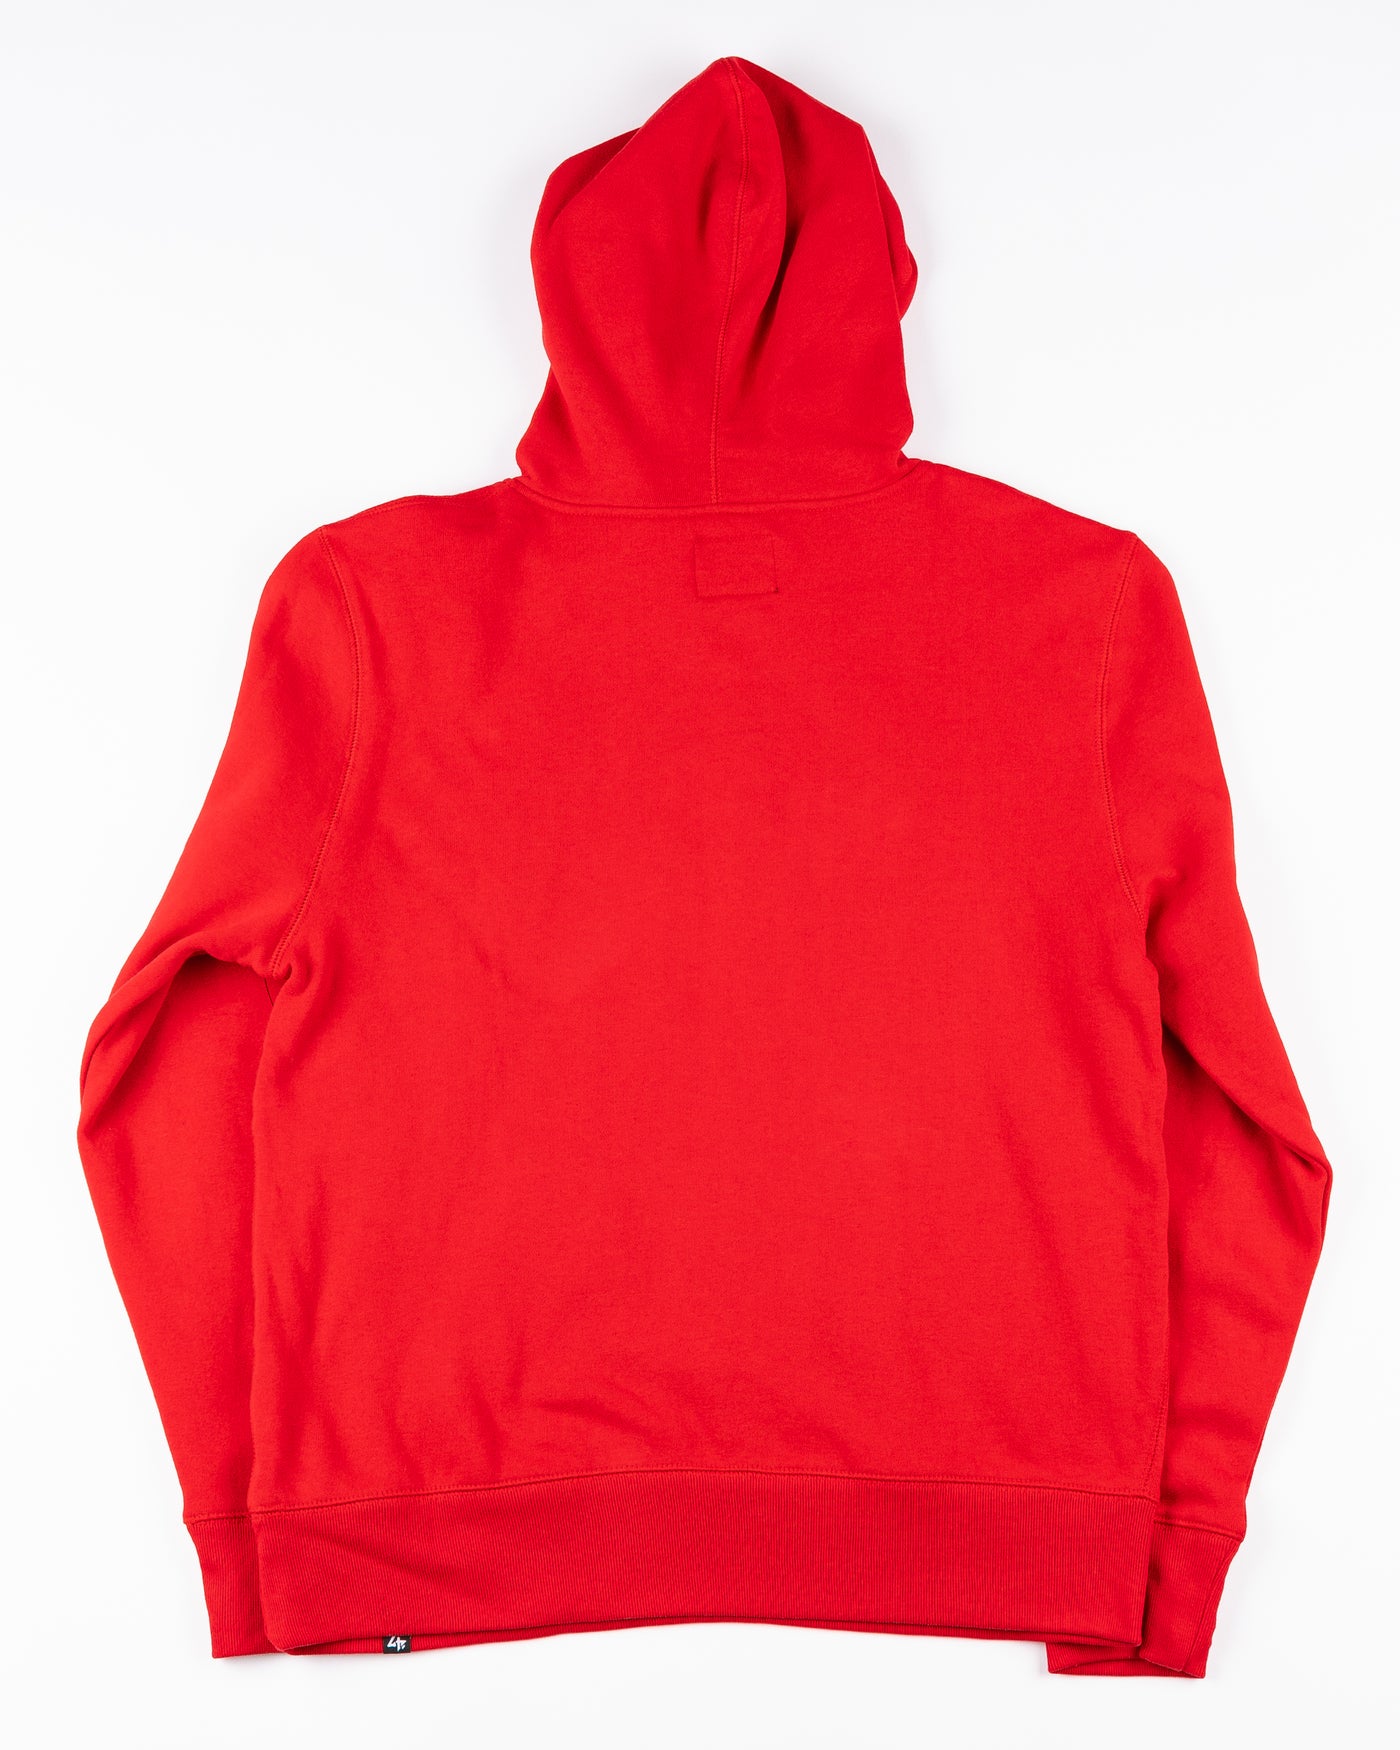 red '47 brand hoodie with Chicago Blackhawks primary logo on front - back lay flat